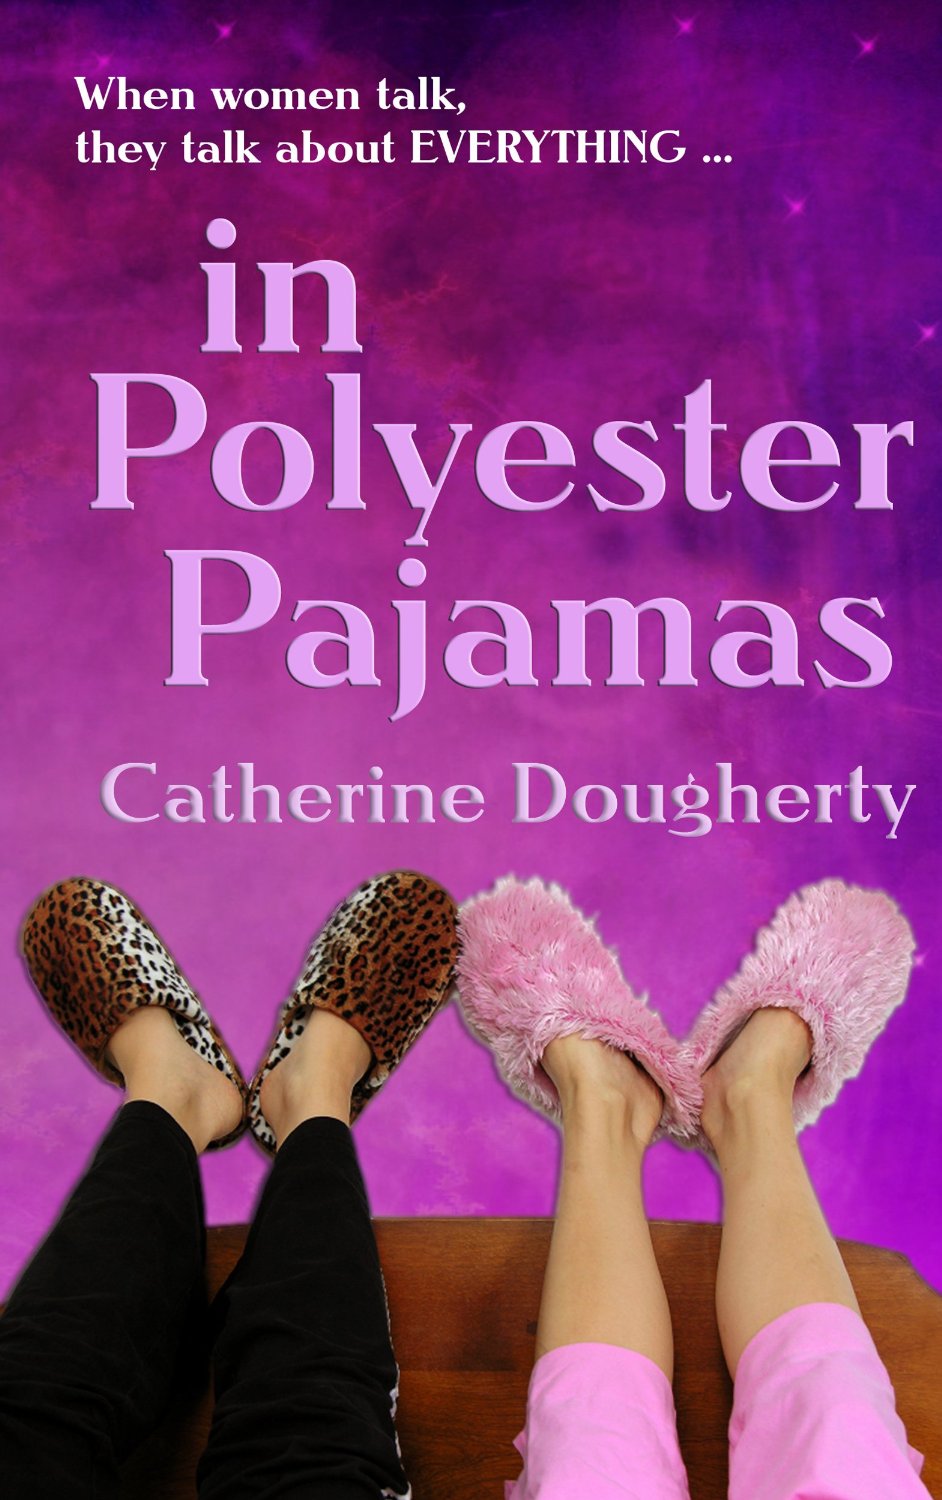 in Polyester Pajamas by Catherine Dougherty